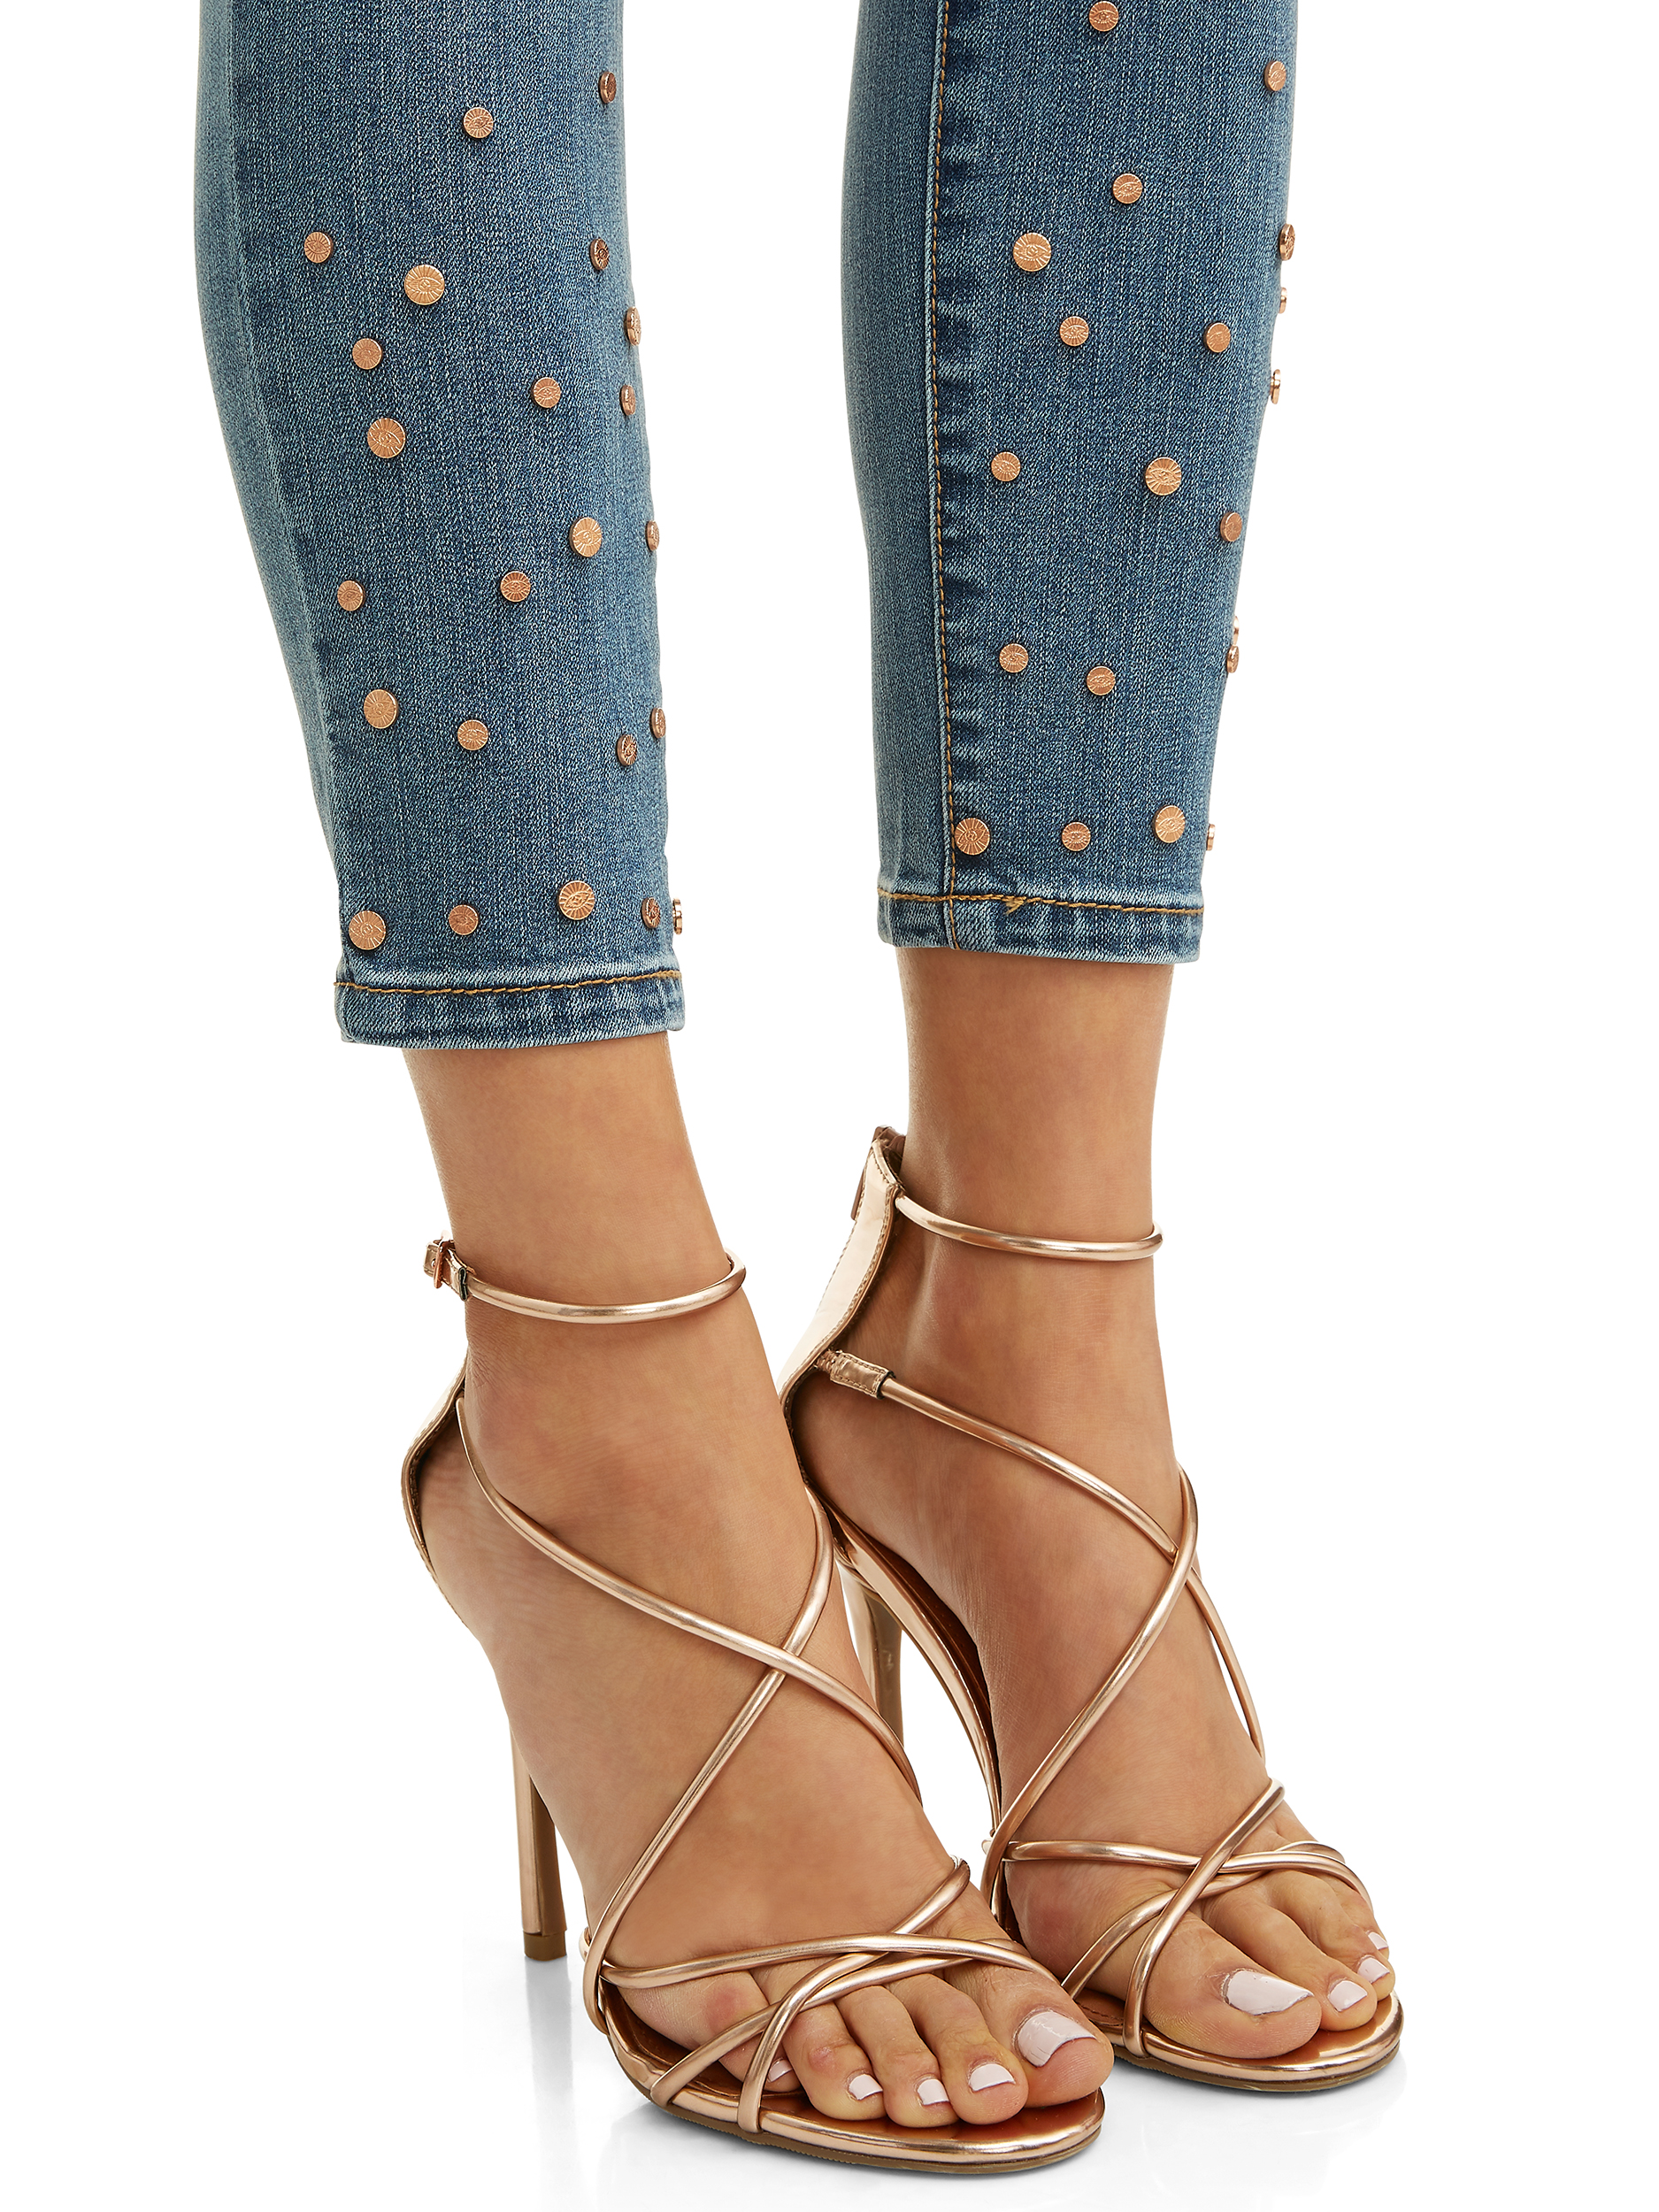 Sofia Jeans Skinny Studded Mid Rise Stretch Ankle Jean Women's - image 3 of 6